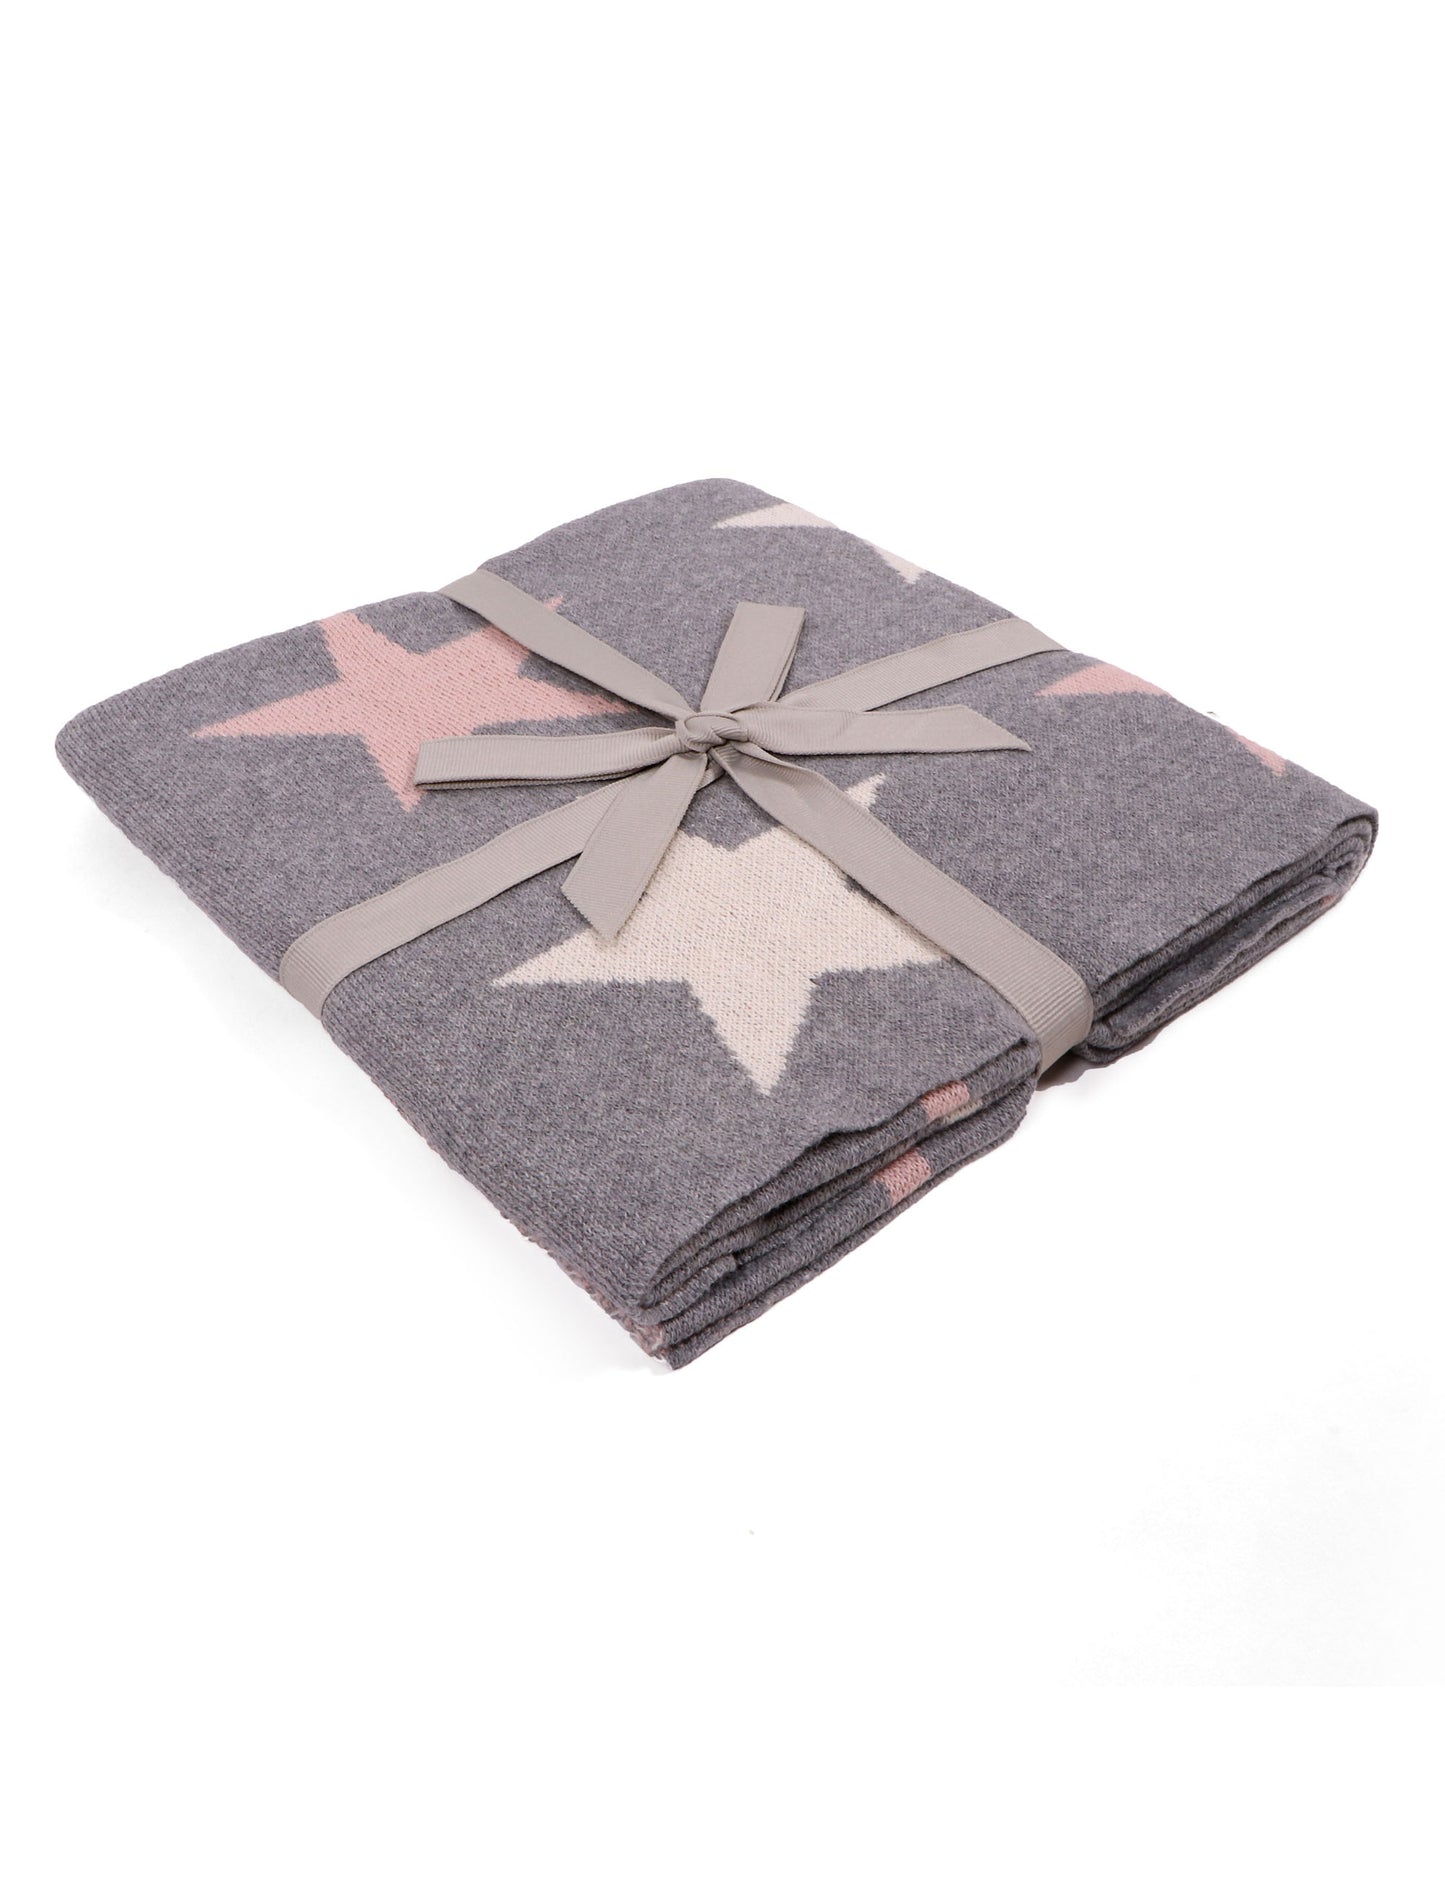 Stars Cotton Knitted Baby Blanket